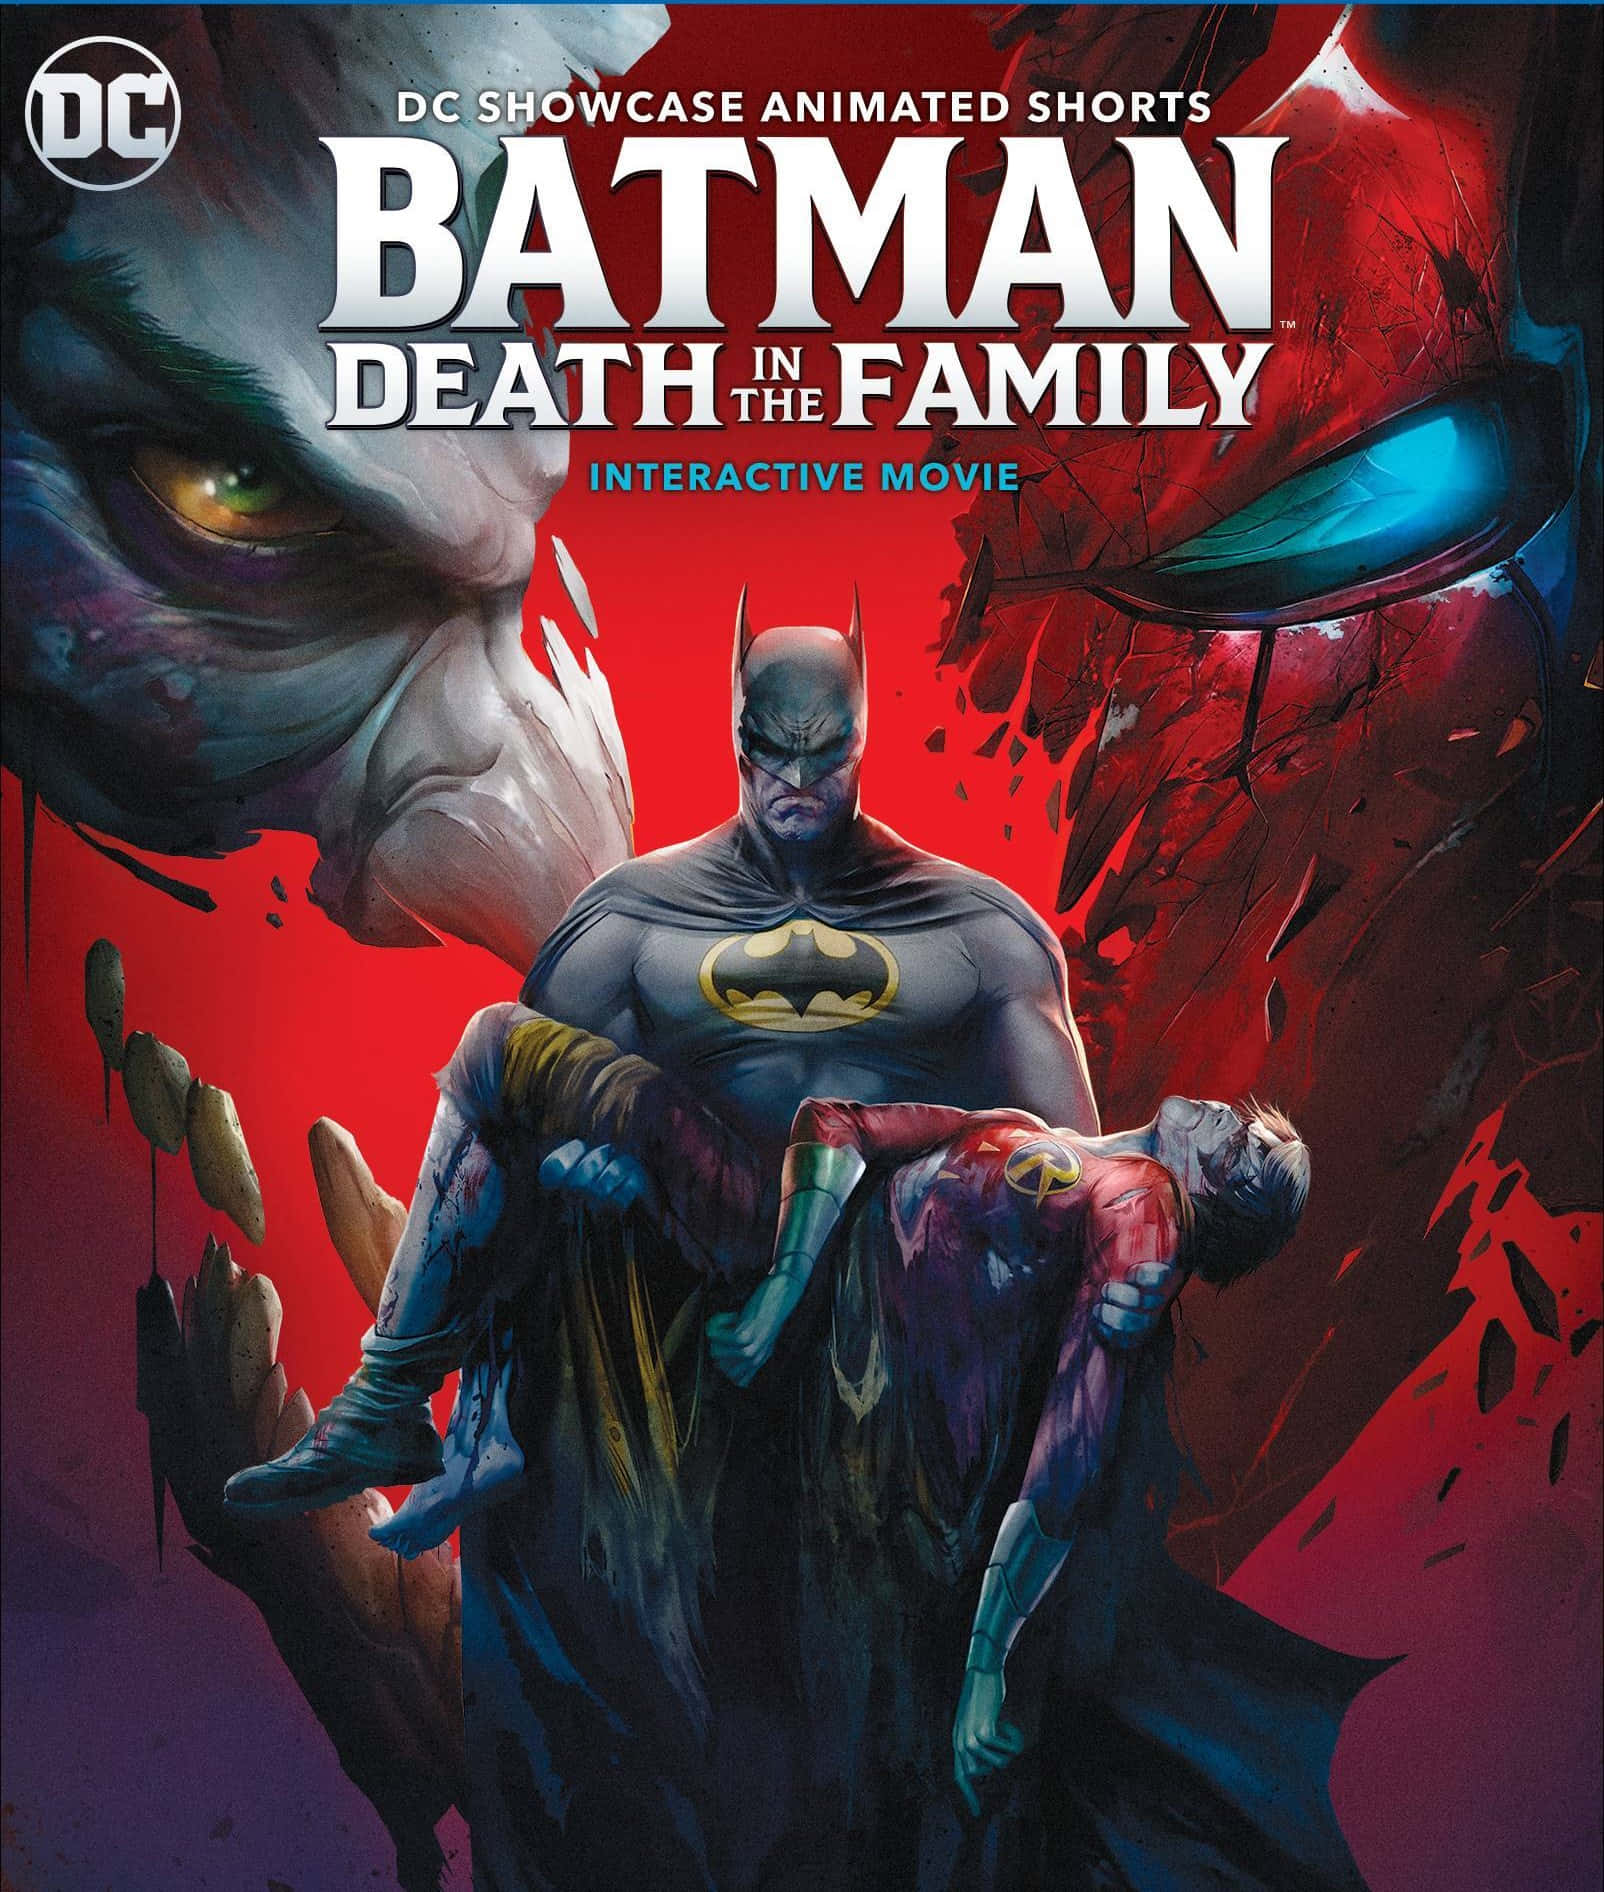 Batman mourning the loss of a close ally in "Death in the Family" Wallpaper